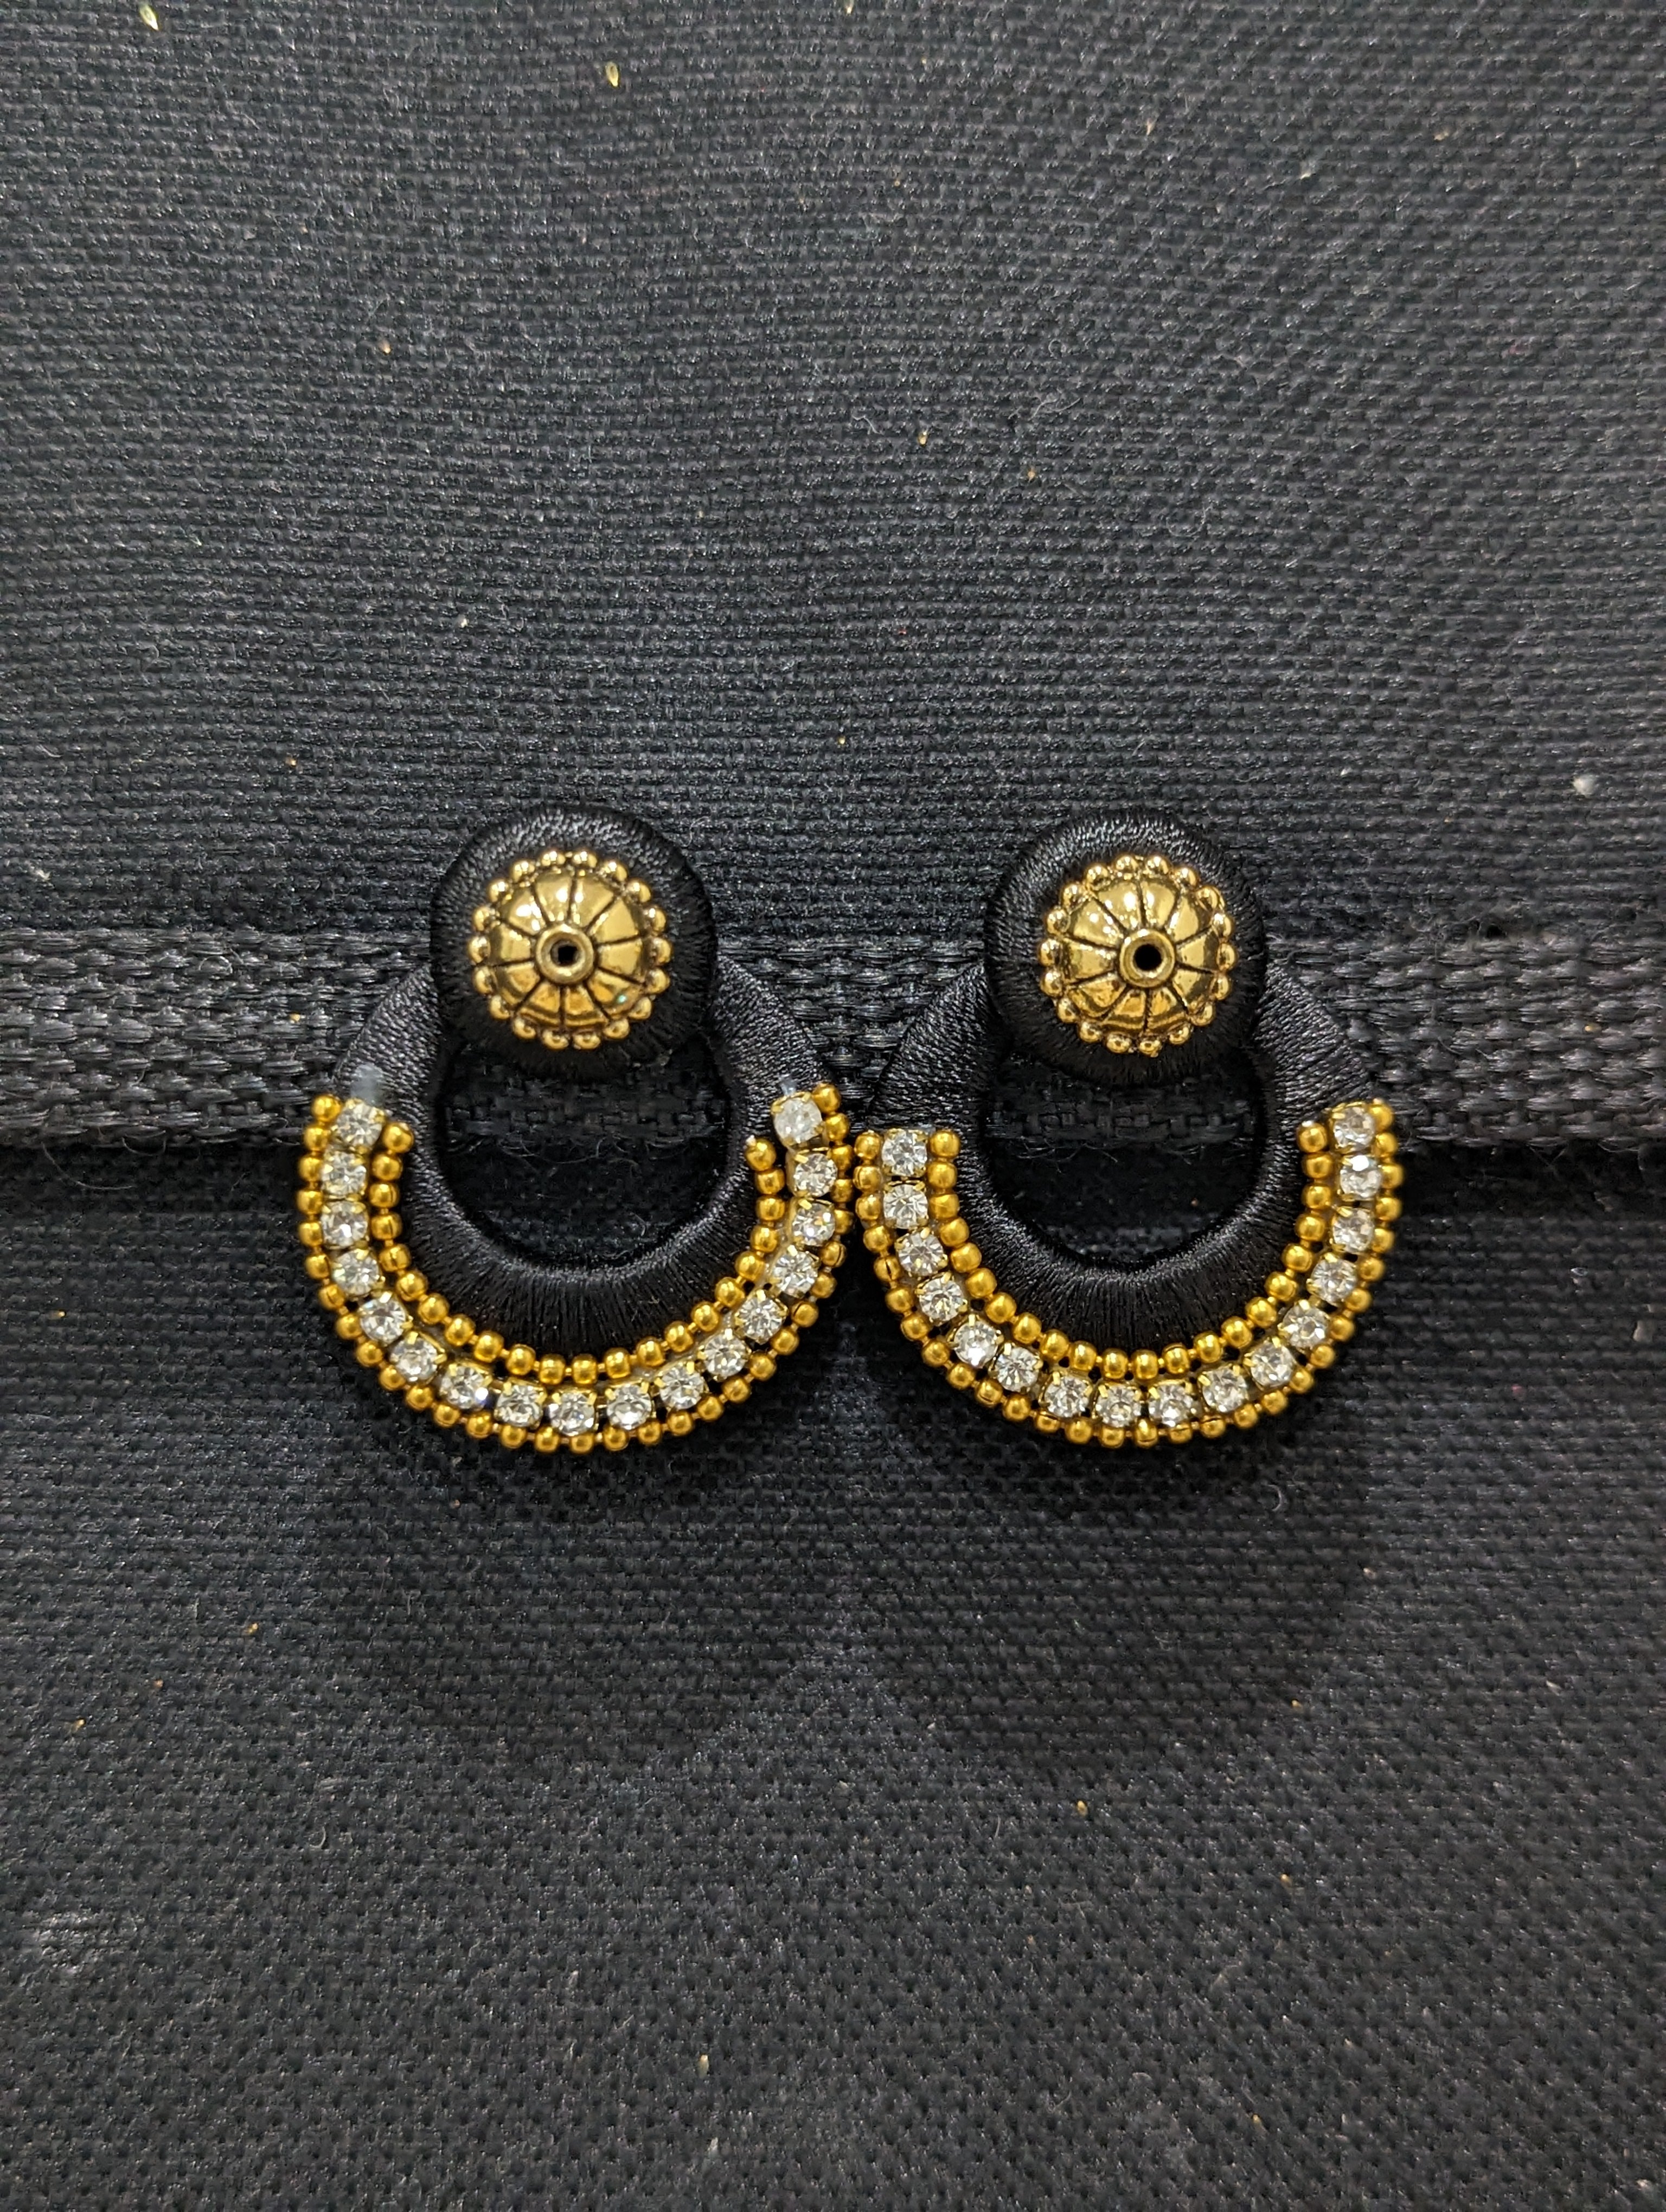 Silk thread Black Jhumka with Gold Plated Stud Earring by Nishna Designs